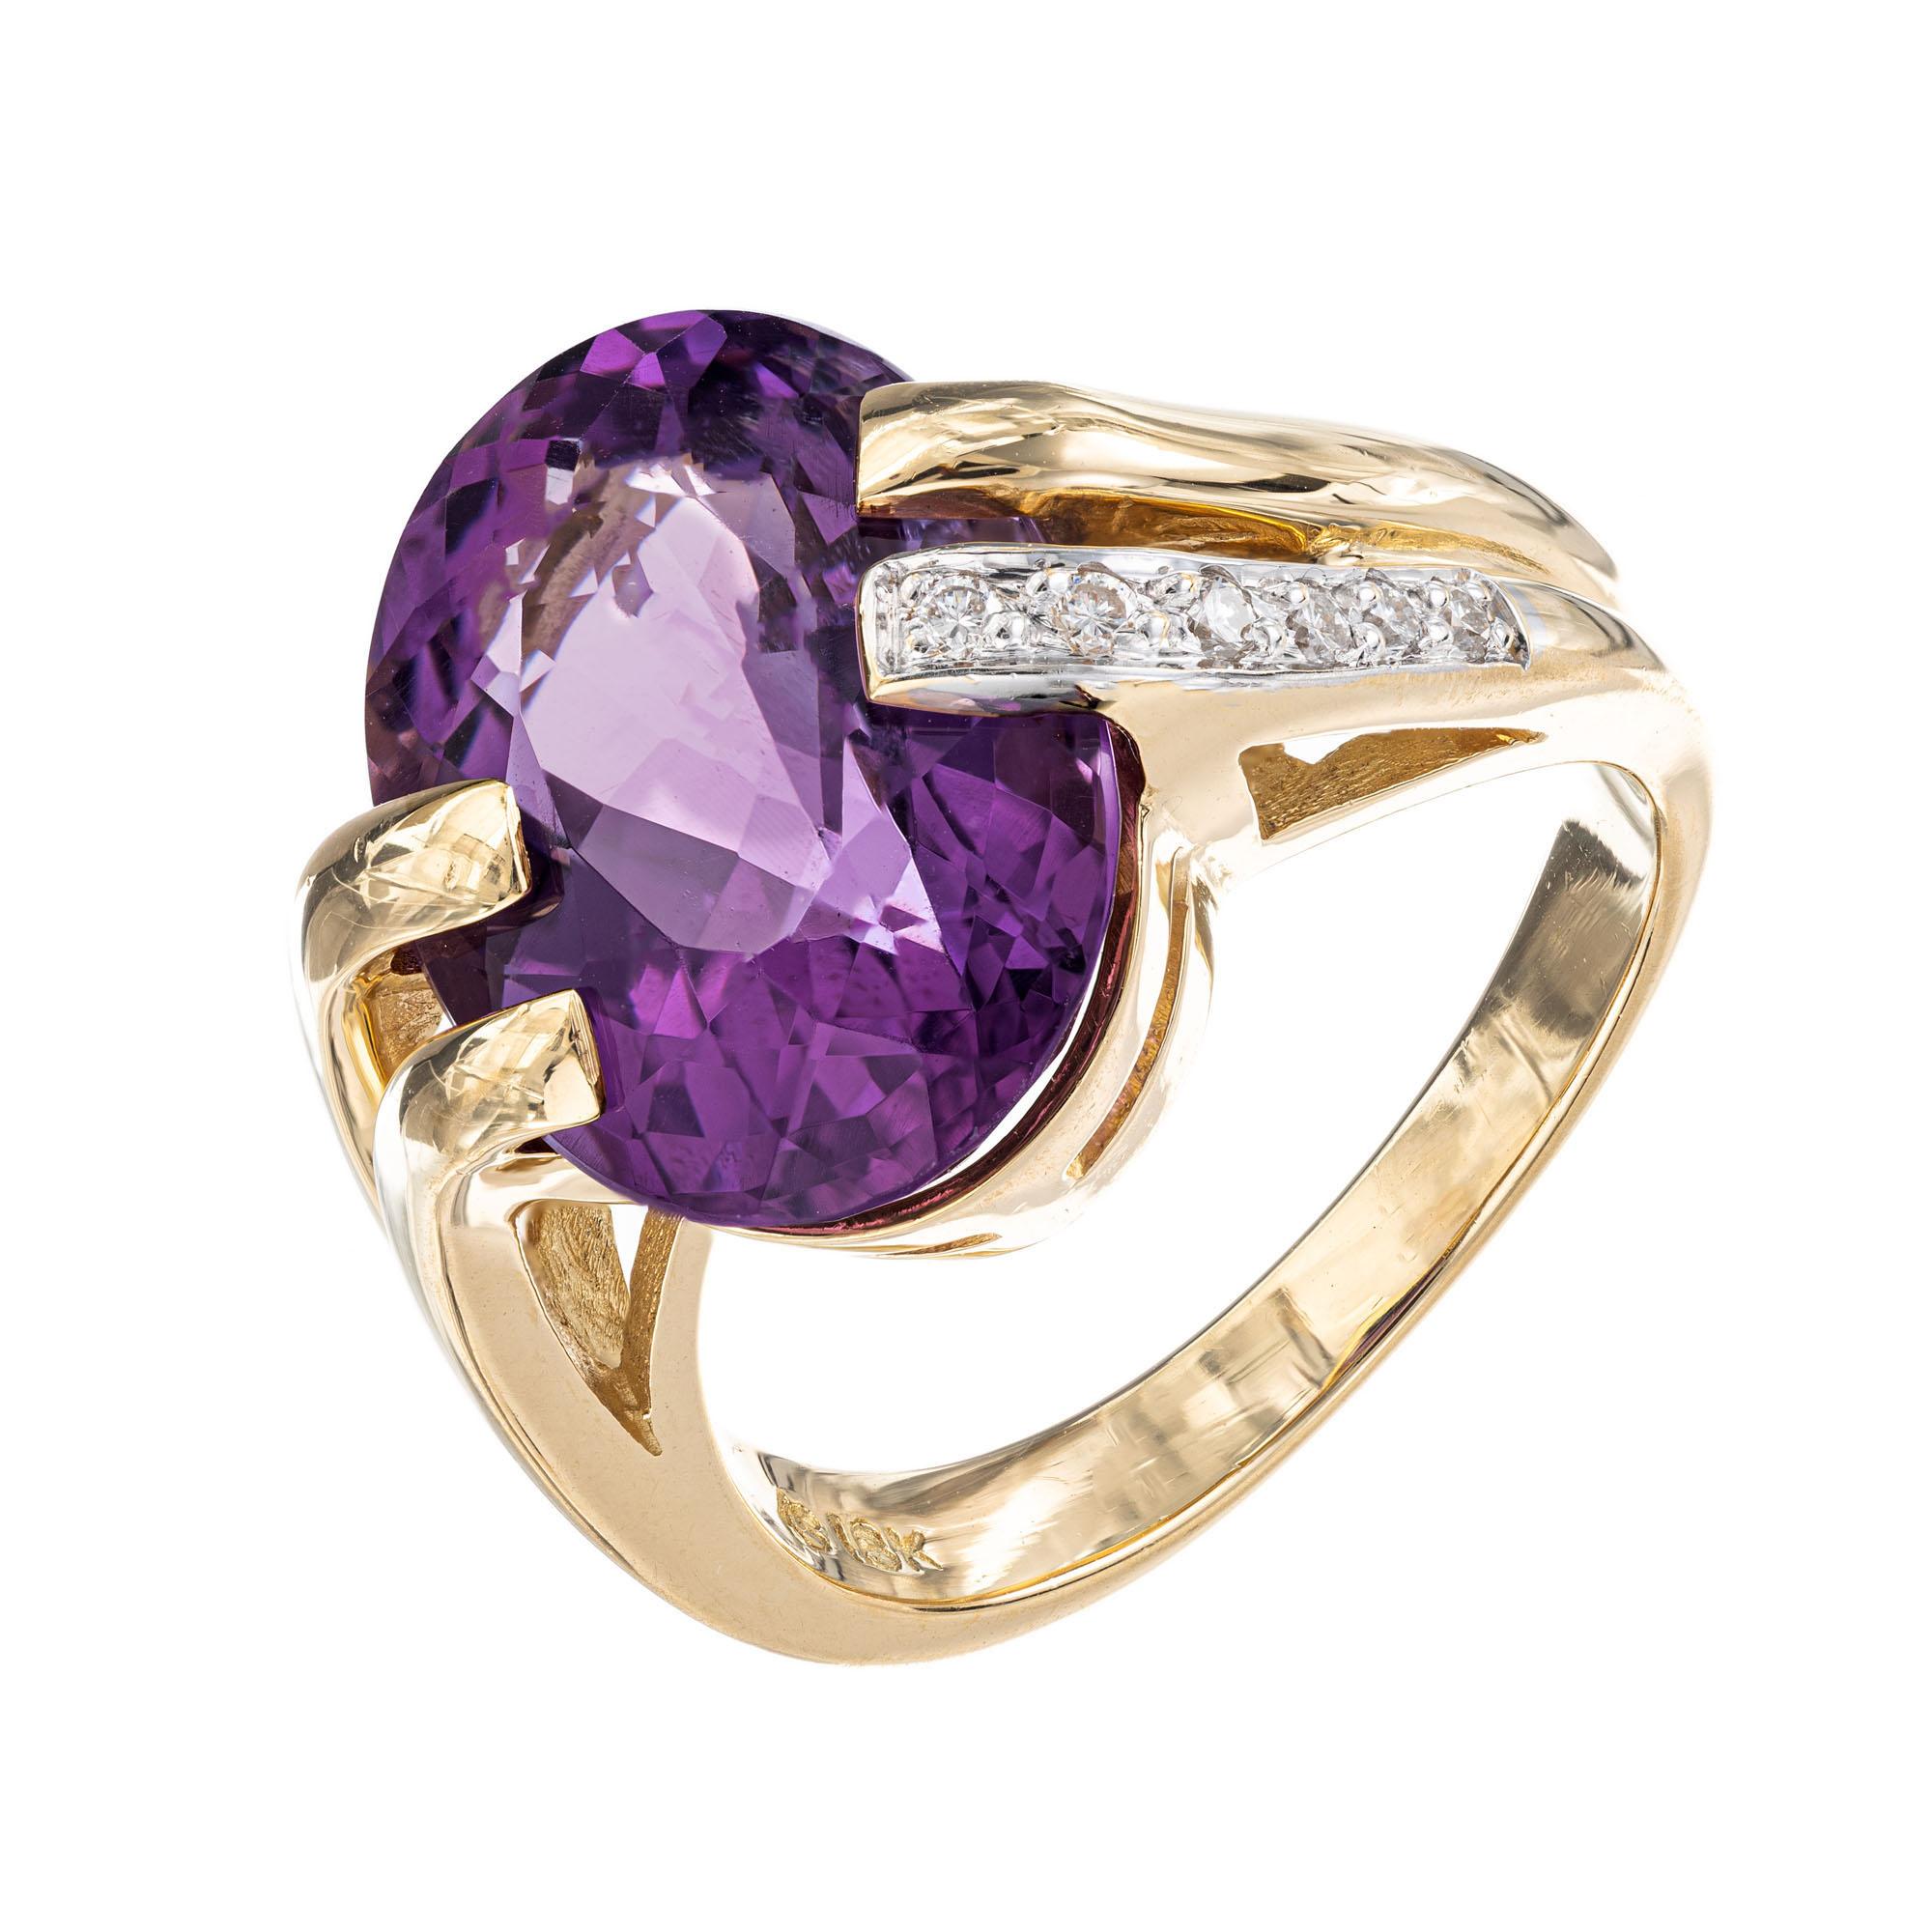 1960's Oval purple and diamond cocktail ring. 6.00ct oval center stone, in an 18k yellow gold swirl setting with 6 round cut diamonds along the shank.

1 oval bright purple Amethyst, approx. total weight 6.00cts, VS, 15.07 x 11.50mm
6 round